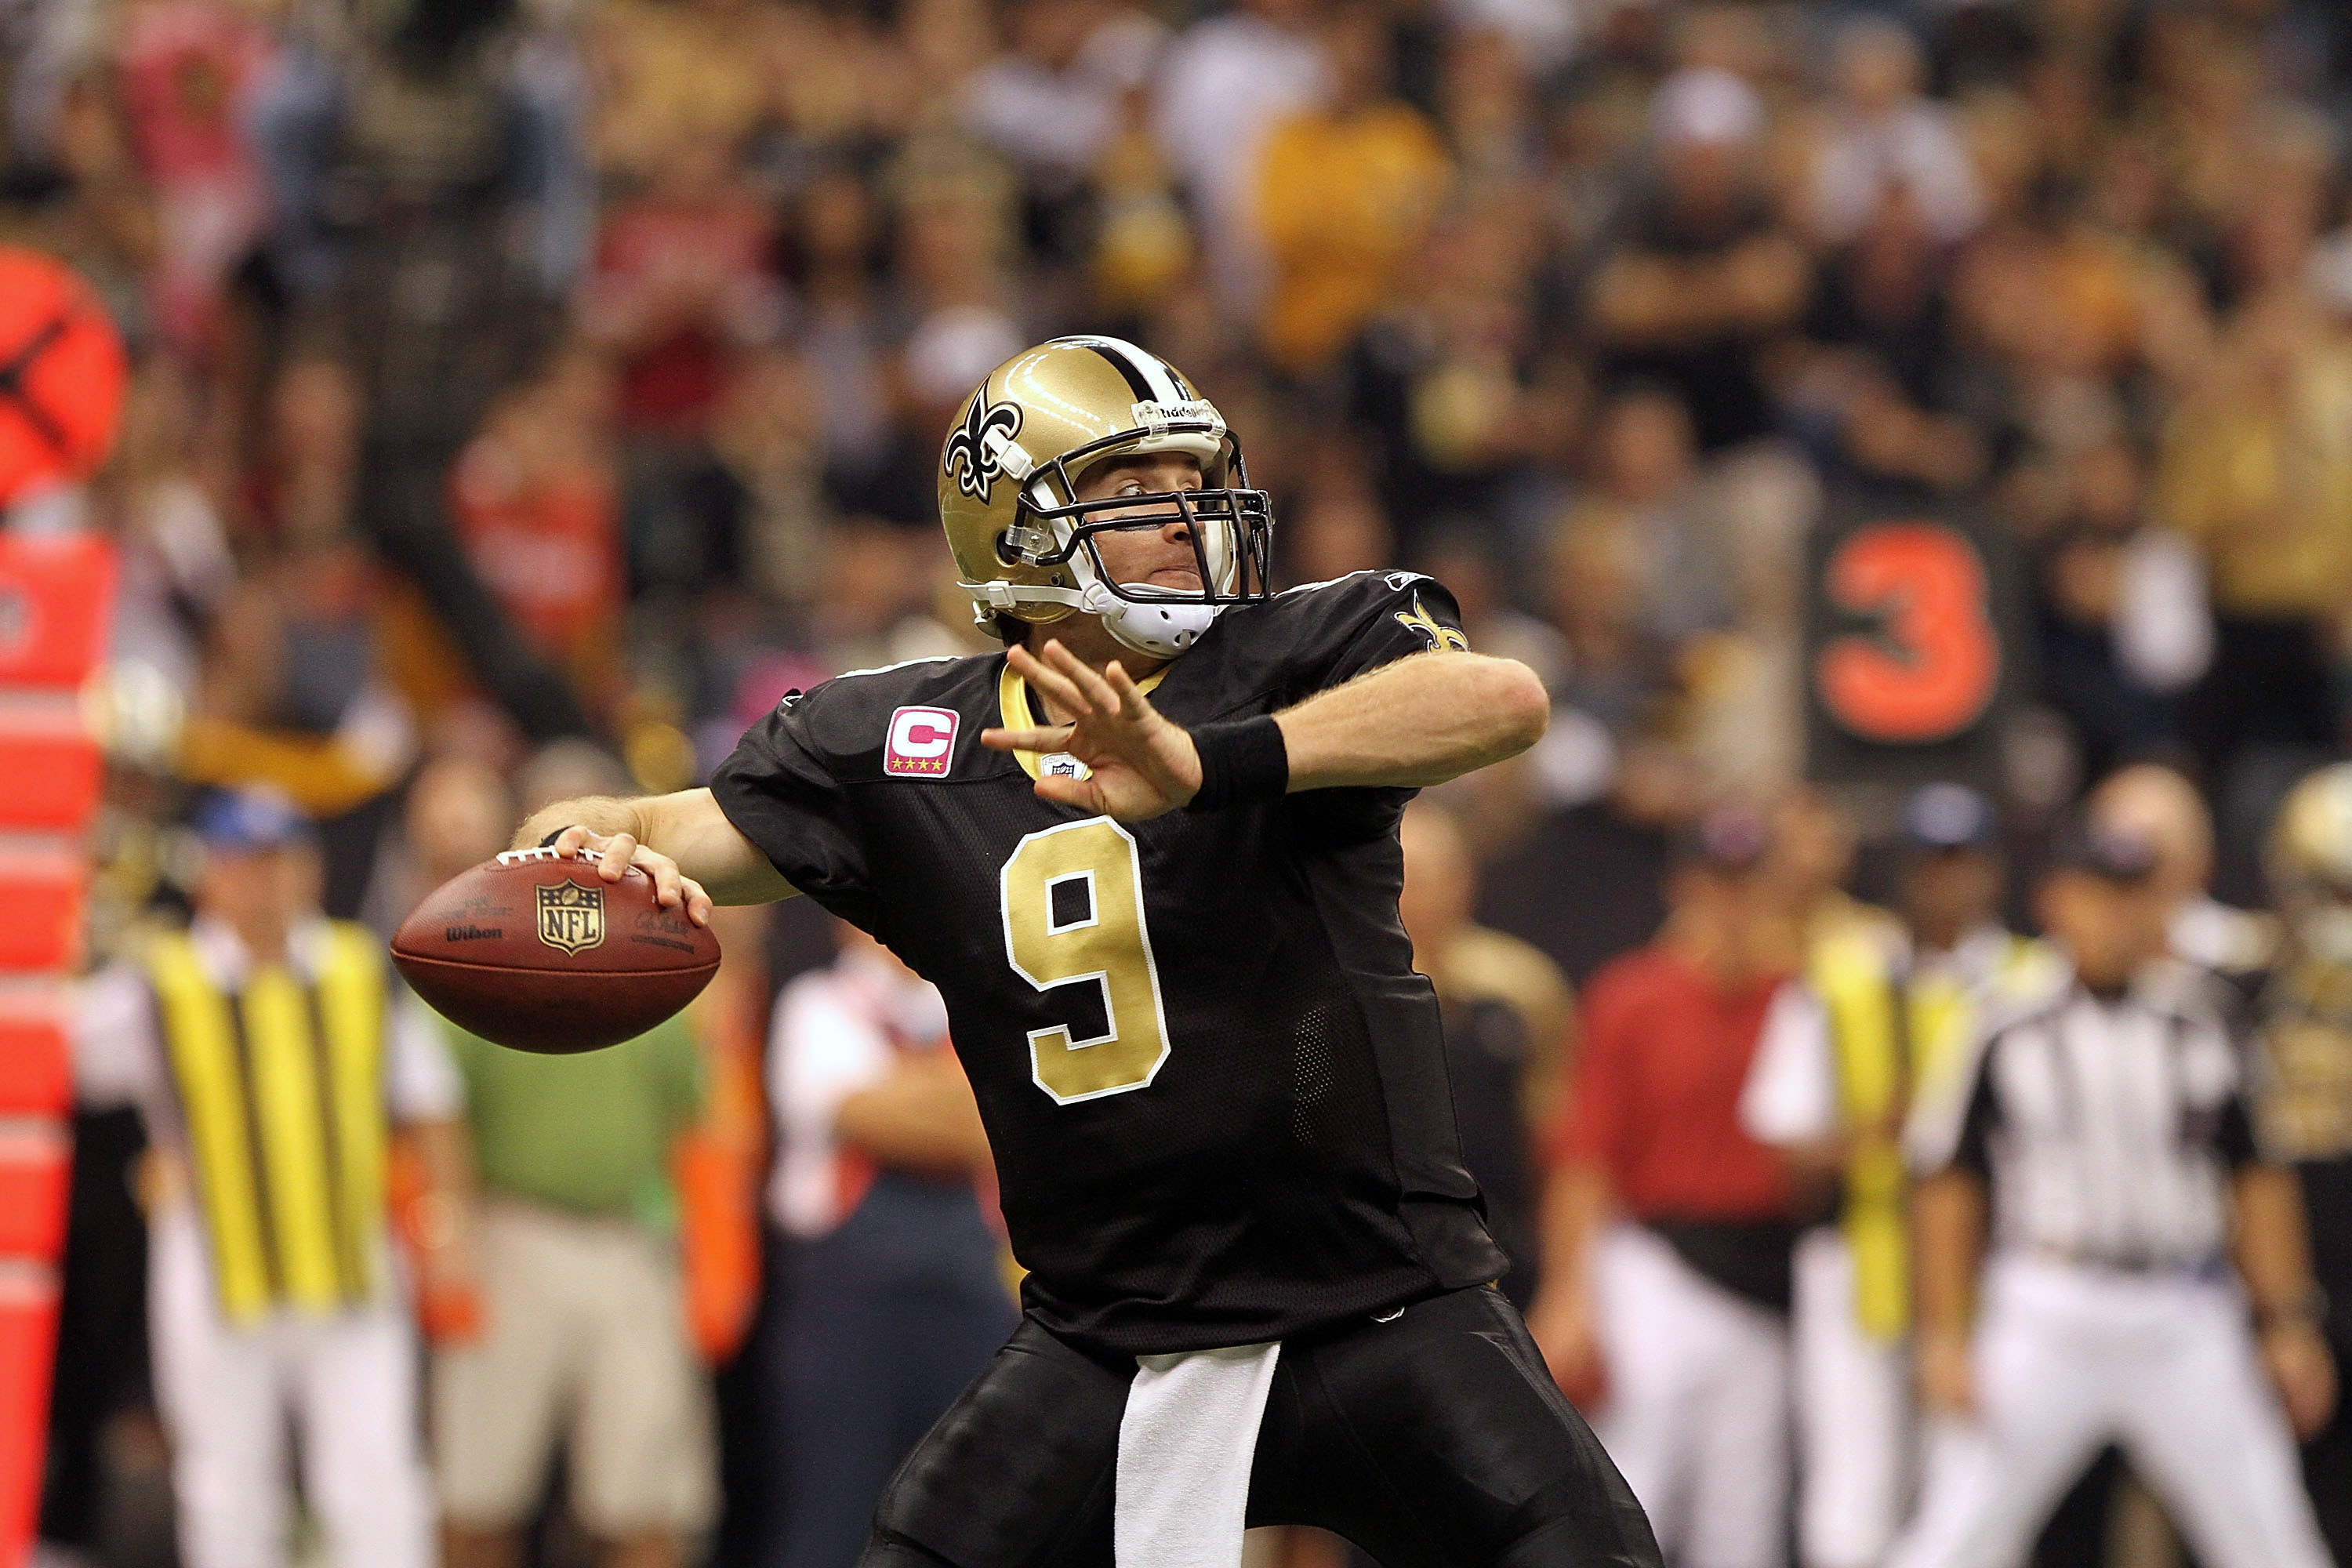 NEW ORLEANS, LA - OCTOBER 31: Drew Brees #9 of the New Orleans Saints throws the ball against the Pittsburgh Steelers at the Louisiana Superdome on October 31, 2010 in New Orleans, Louisiana. (Photo by Matthew Sharpe/Getty Images)